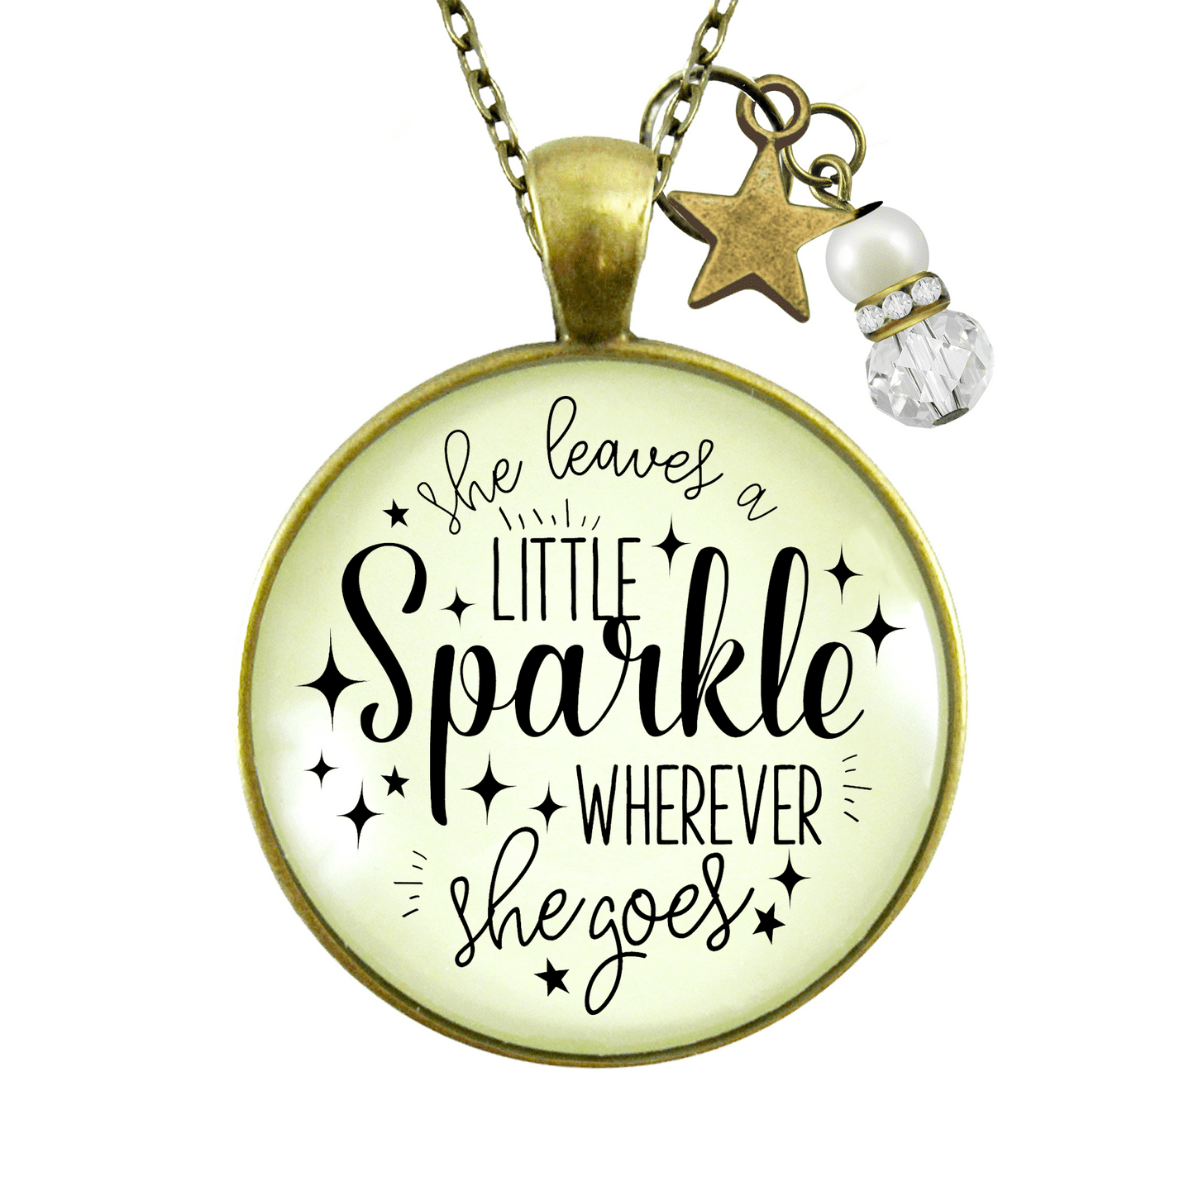 Gutsy Goodness She Leaves a Little Sparkle Glam Quote Necklace Life Jewelry Gift Star Charm - Gutsy Goodness Handmade Jewelry;She Leaves A Little Sparkle Glam Quote Necklace Life Jewelry Gift Star Charm - Gutsy Goodness Handmade Jewelry Gifts